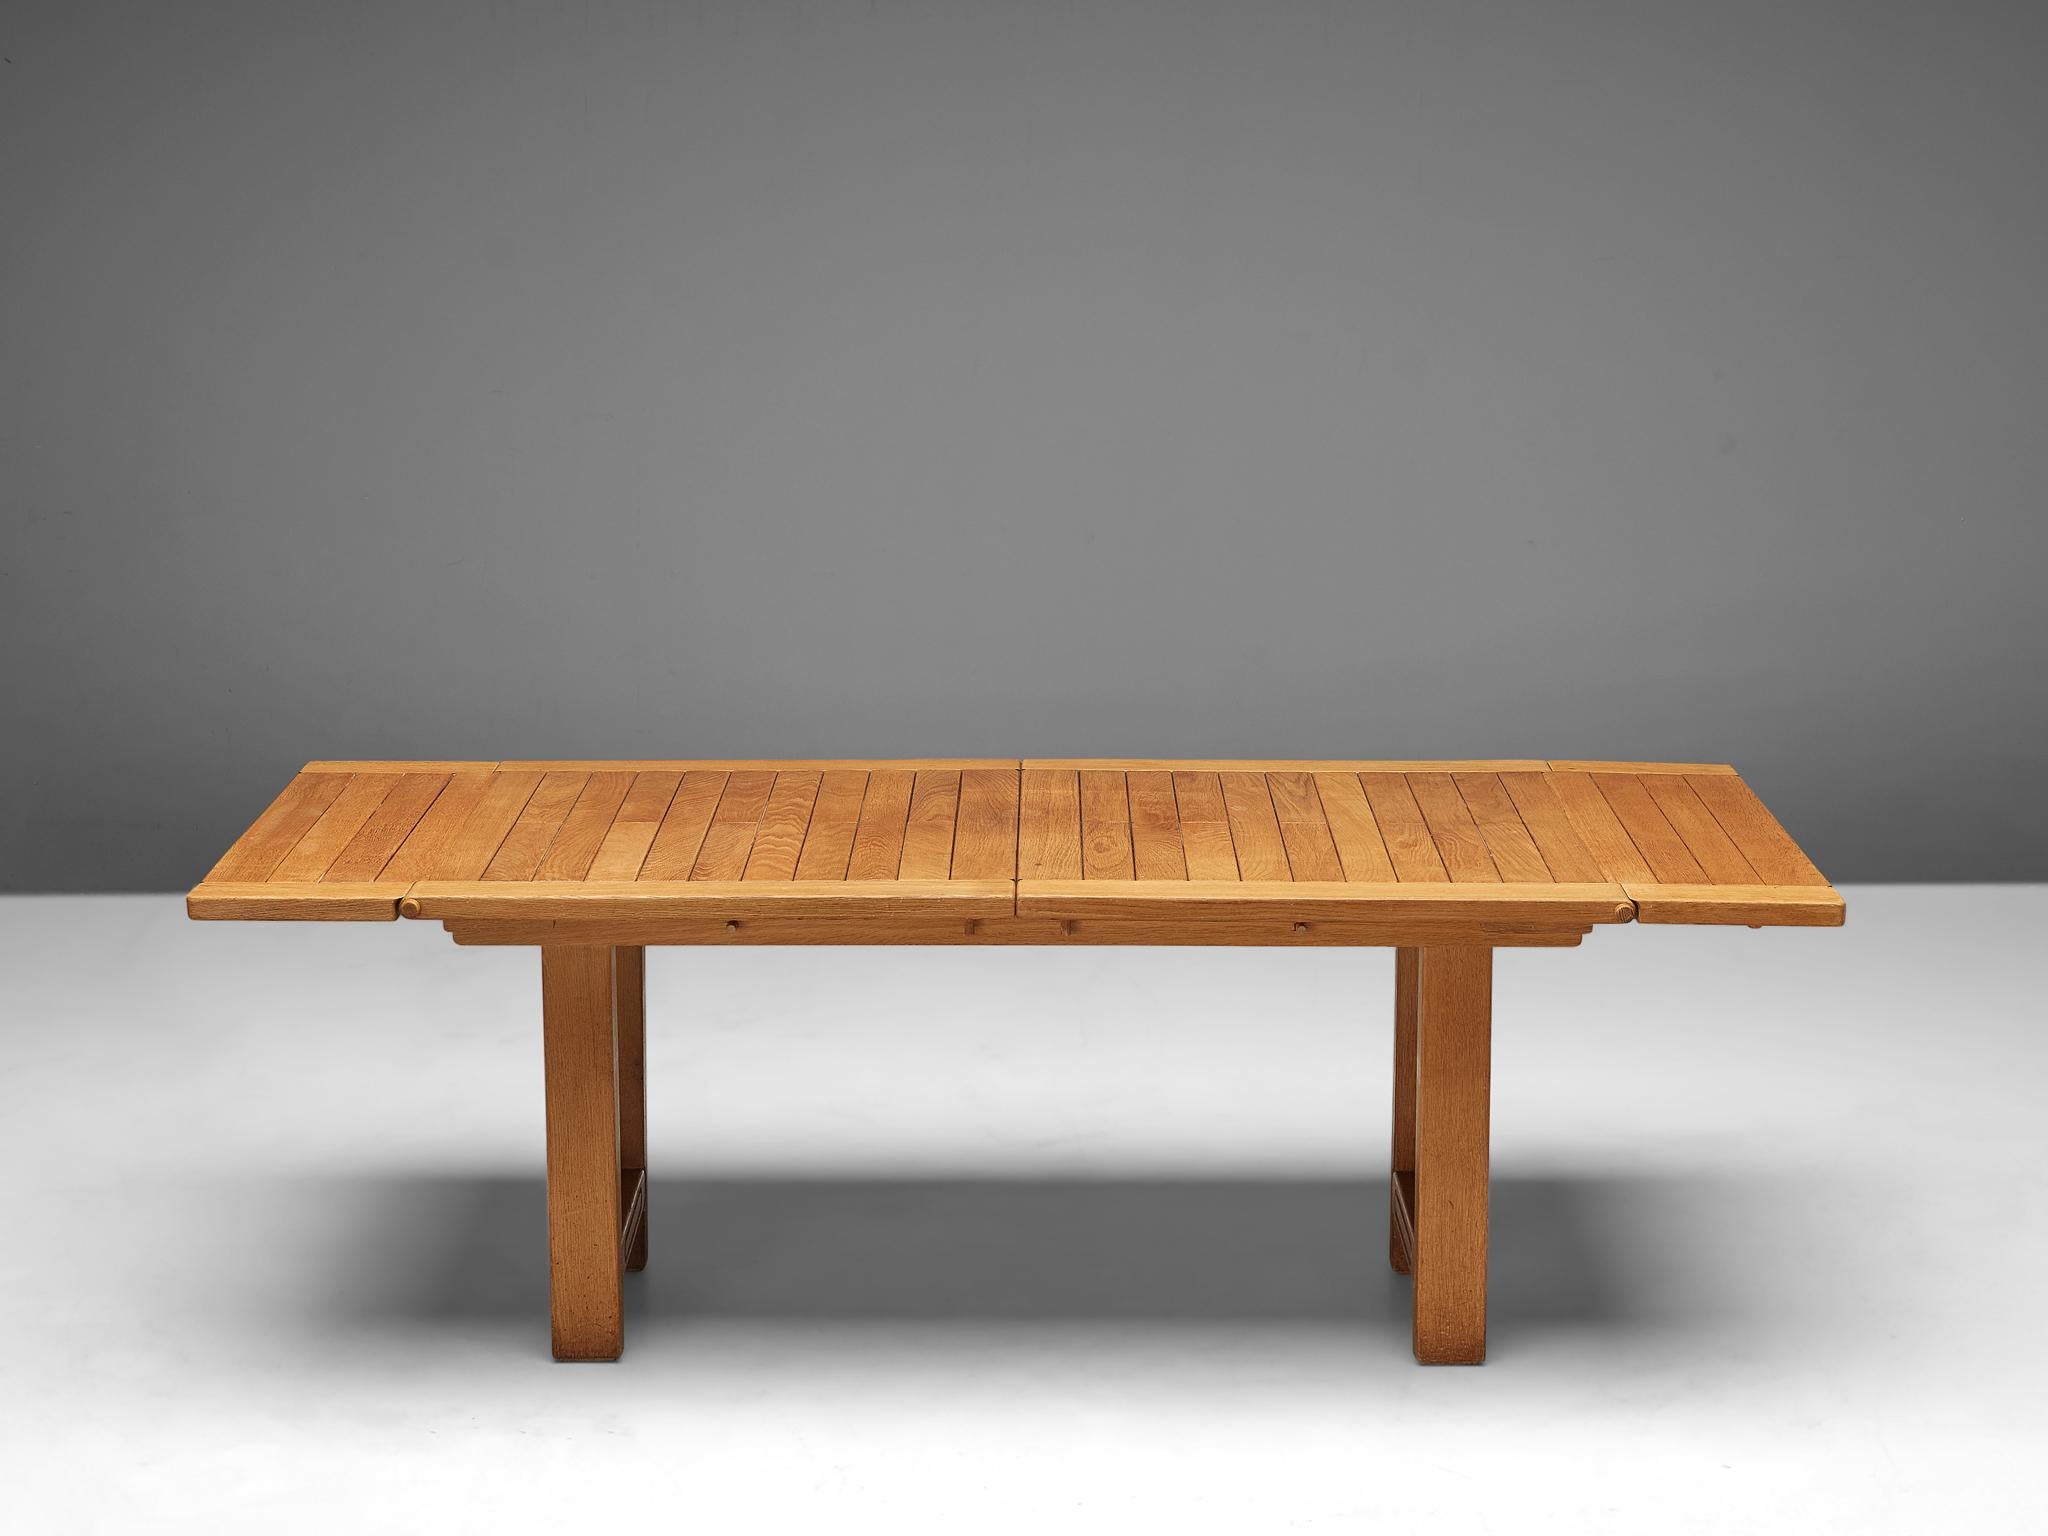 Guillerme & Chambron, extendable dining table model 'Bourbonnais', in oak, France, 1970s.

The solid frame together with the extendible leaves are in a very good working condition. The leaves are 'hidden' under the top and this table could easily be